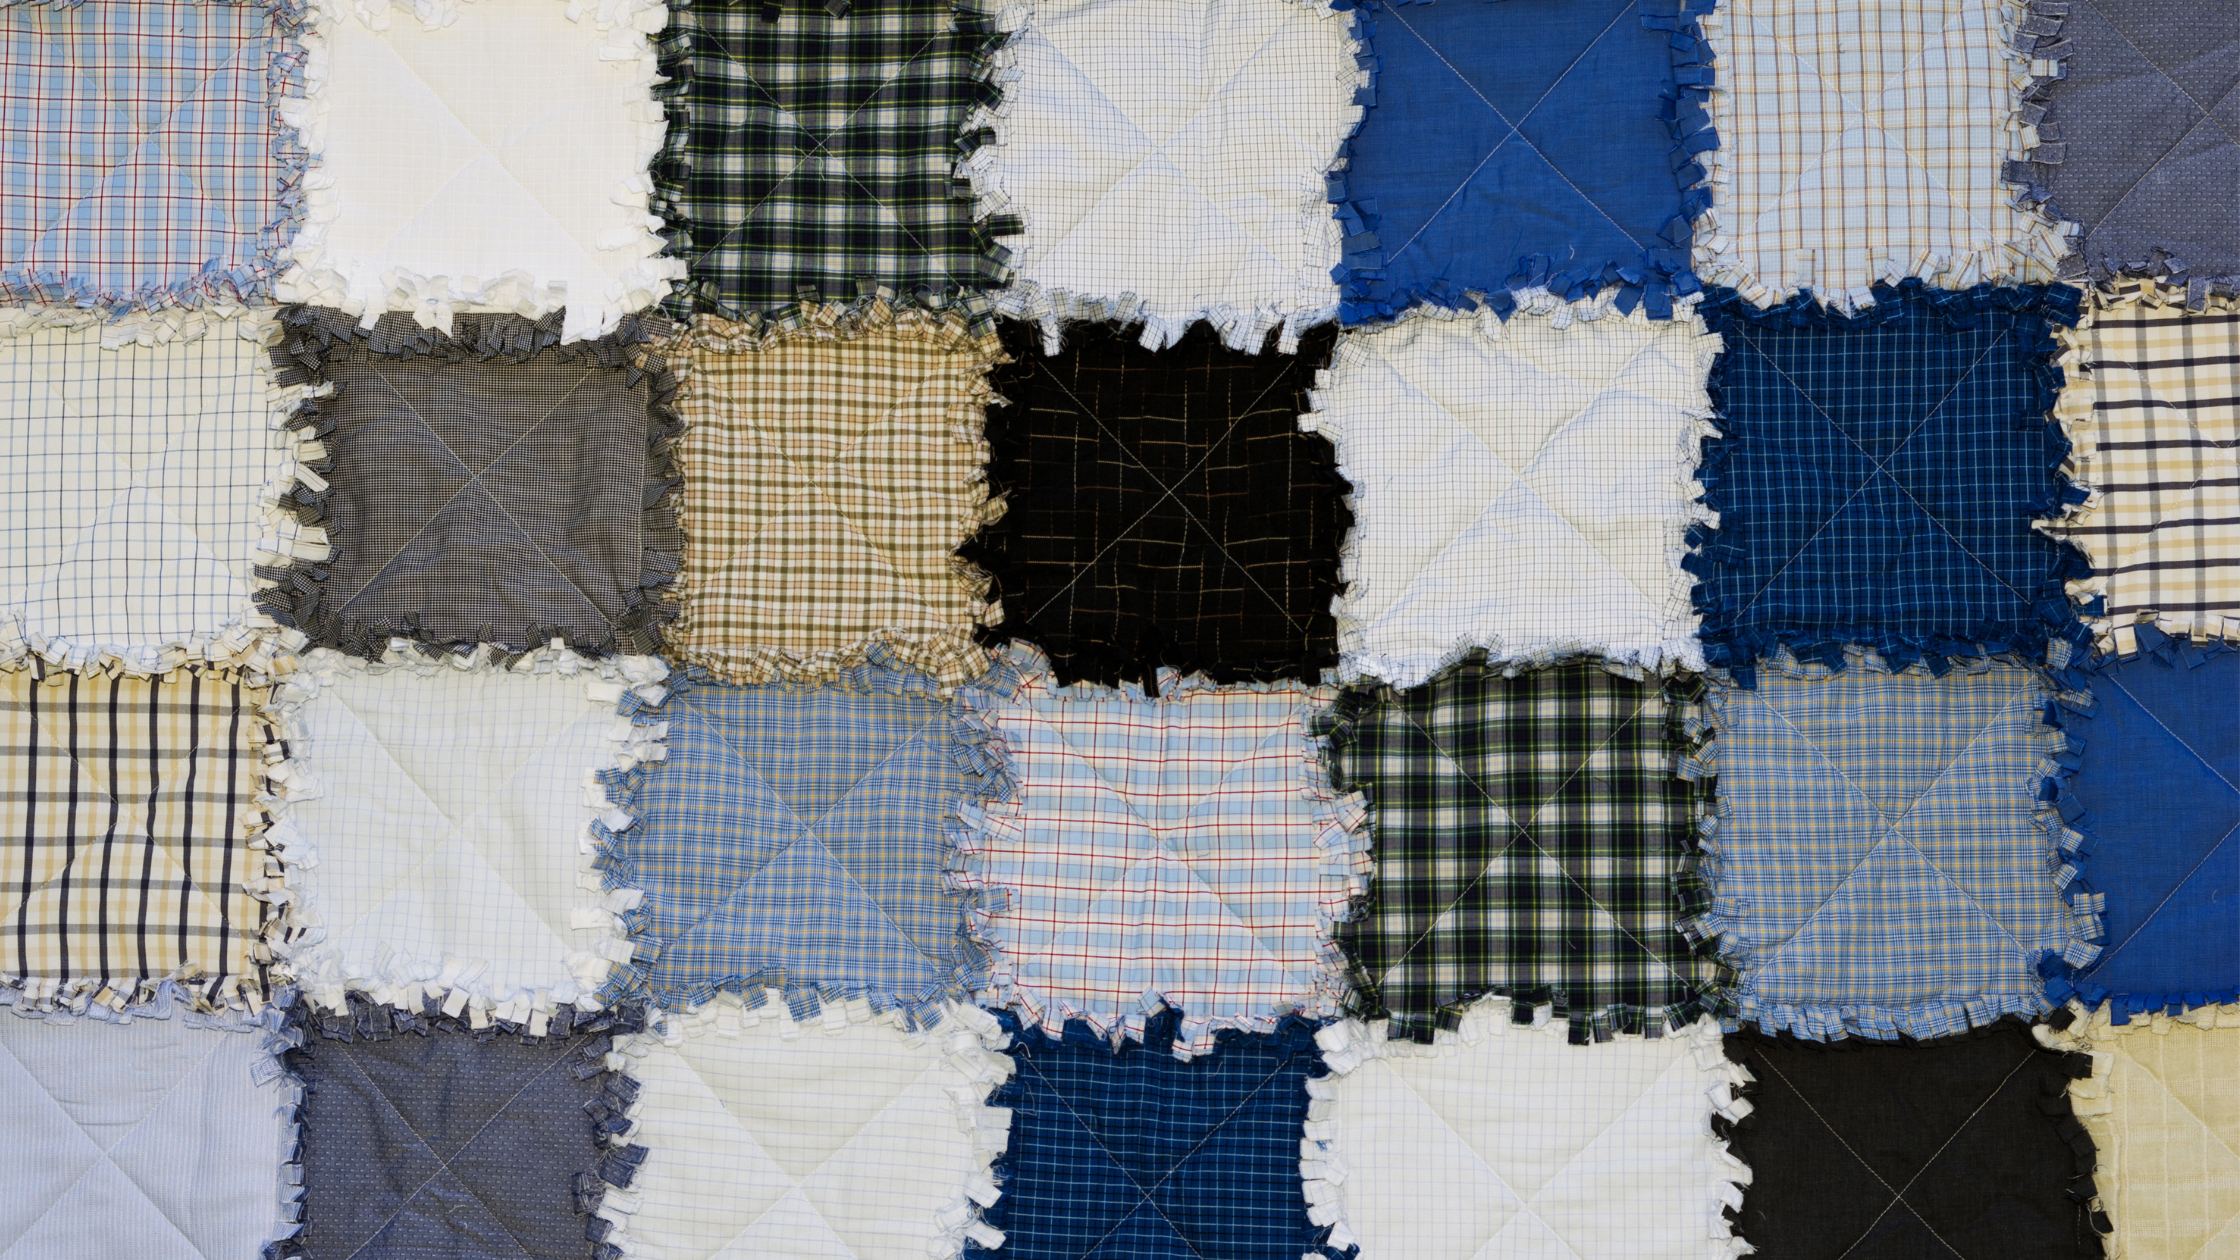 Patchwork quilt made from departed's clothing.